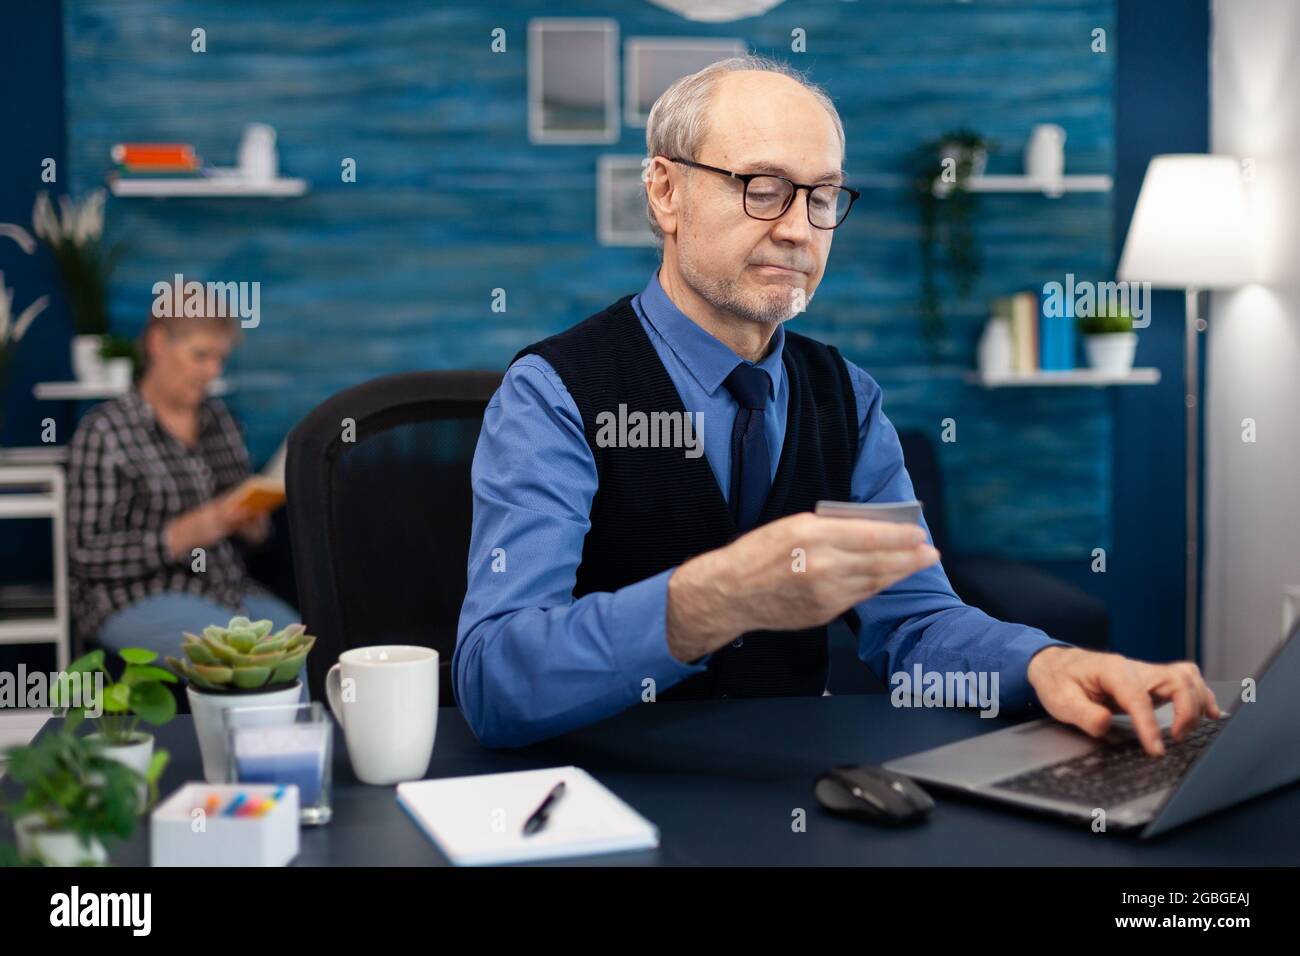 Senior man using credit card to check bank account. Elderly man checking online banking to make shppping payment looking at laptop while wife is reading a book sitting on sofa. Stock Photo